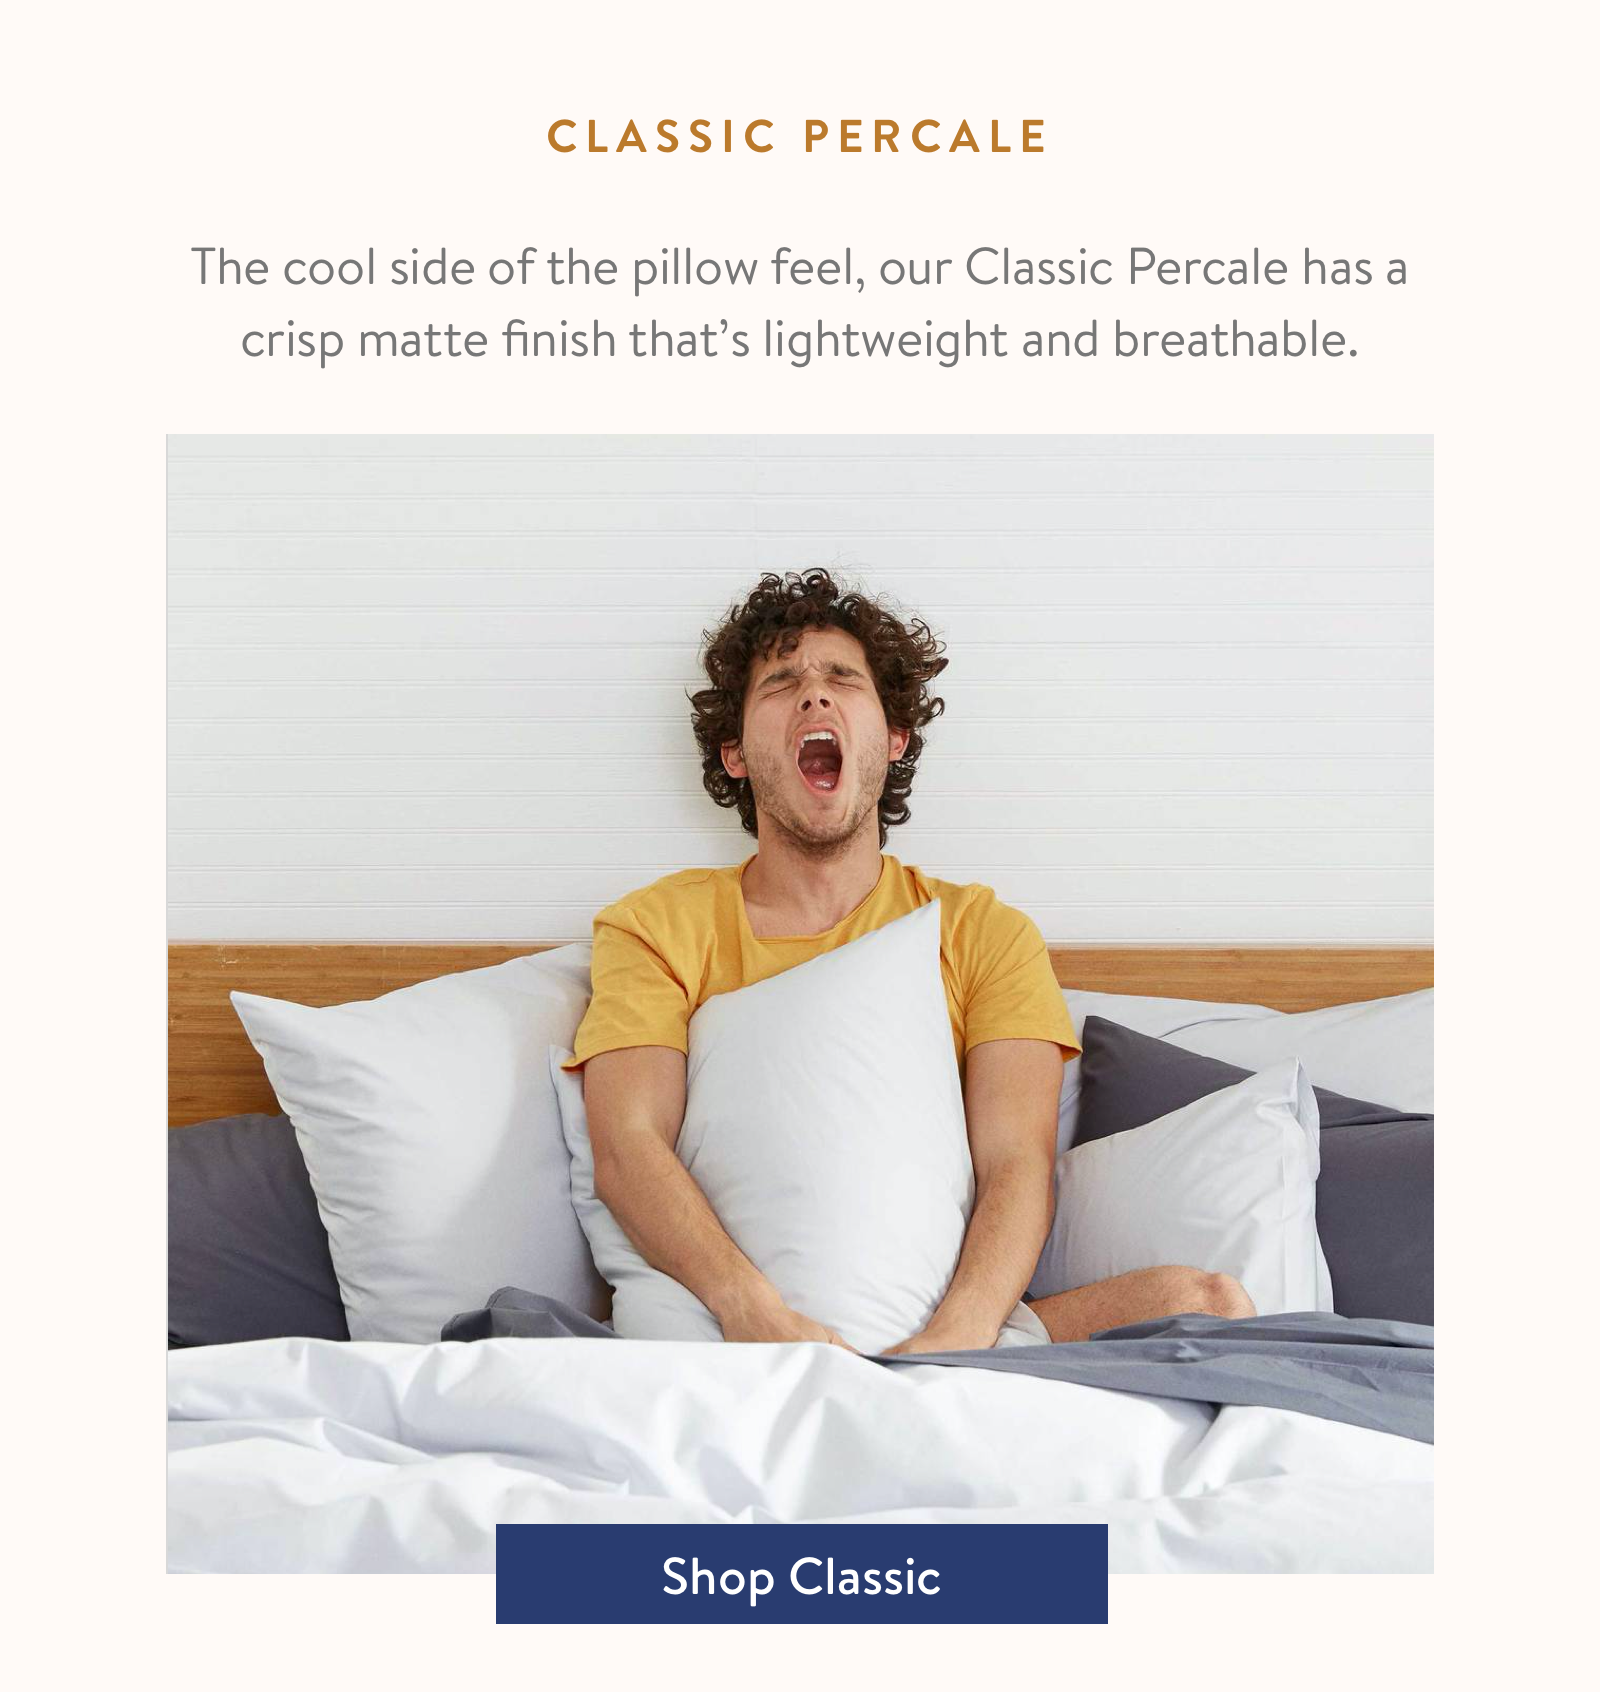 The cool side of the pillow feel, our Classic Percale has a crisp matte finish that's lightweight and breathable.